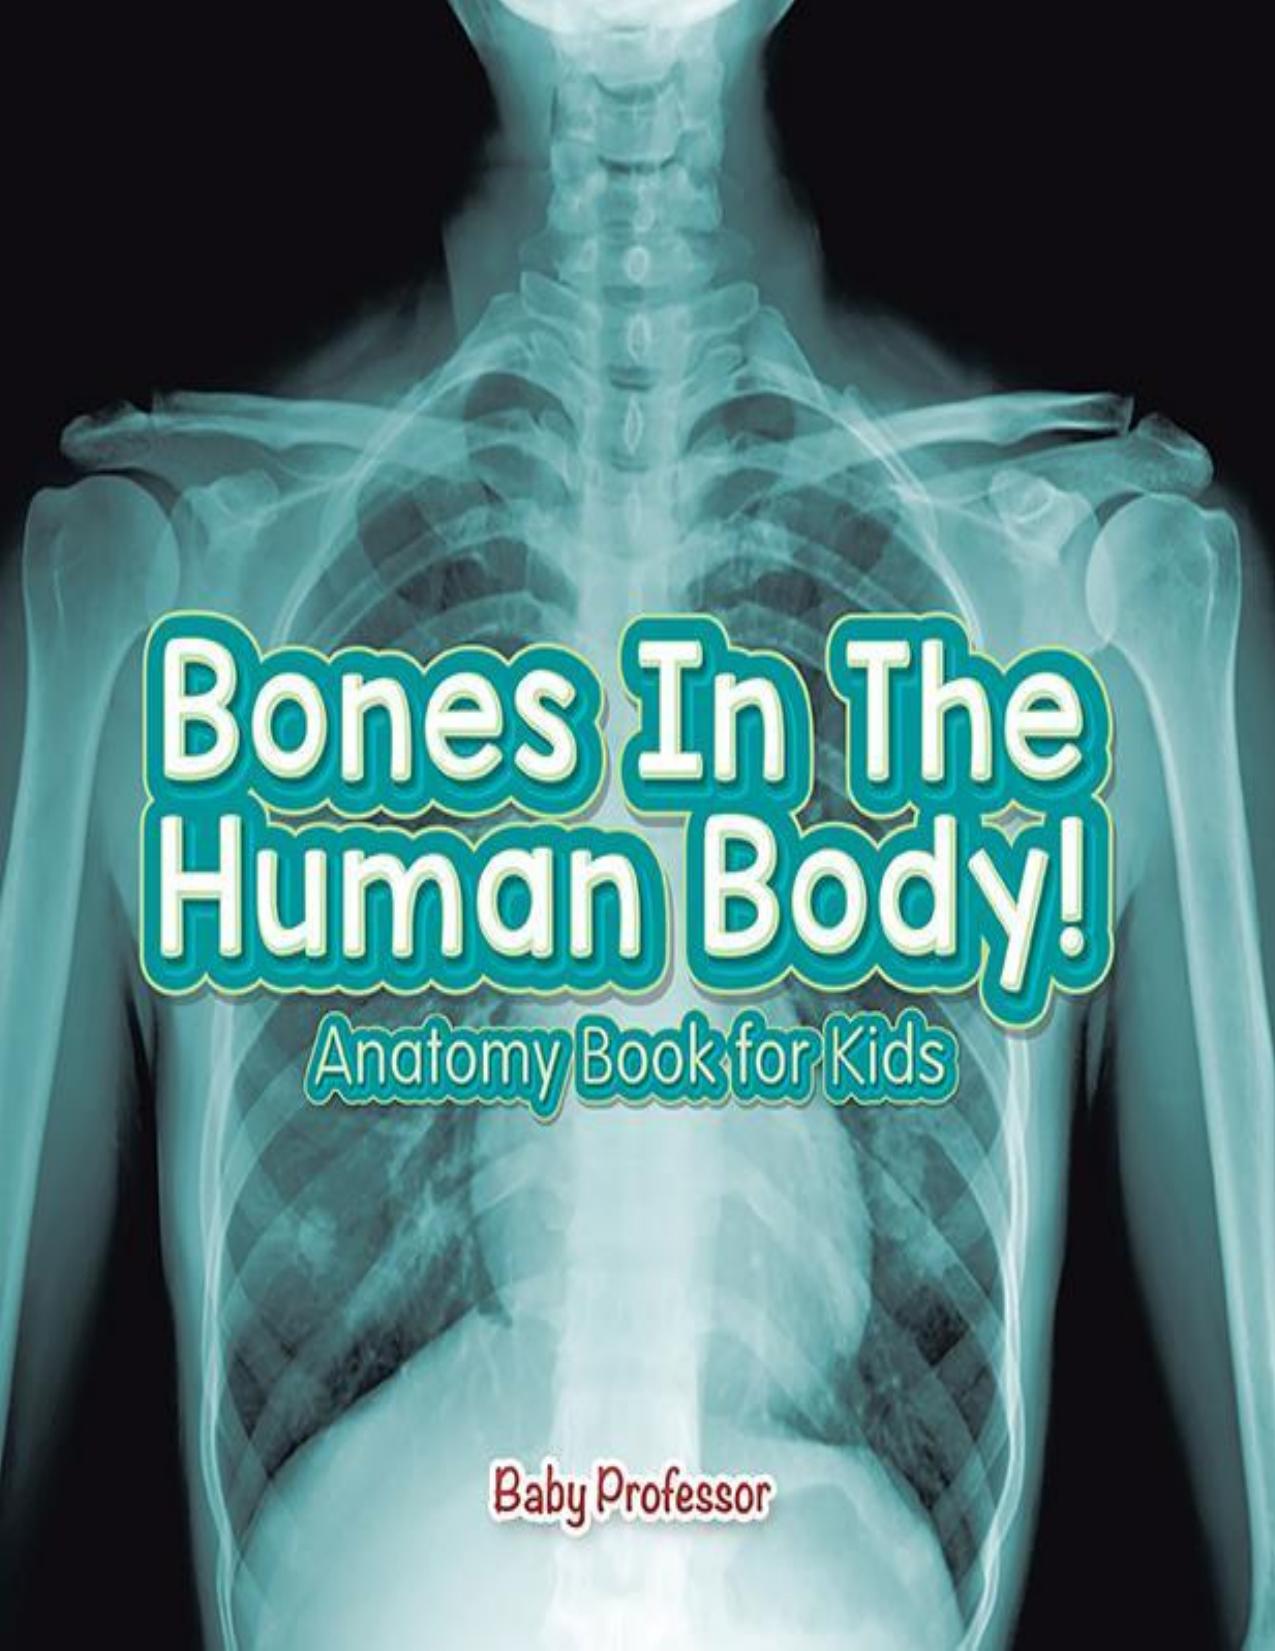 Bones In The Human Body! Anatomy Book for Kids by Baby Professor